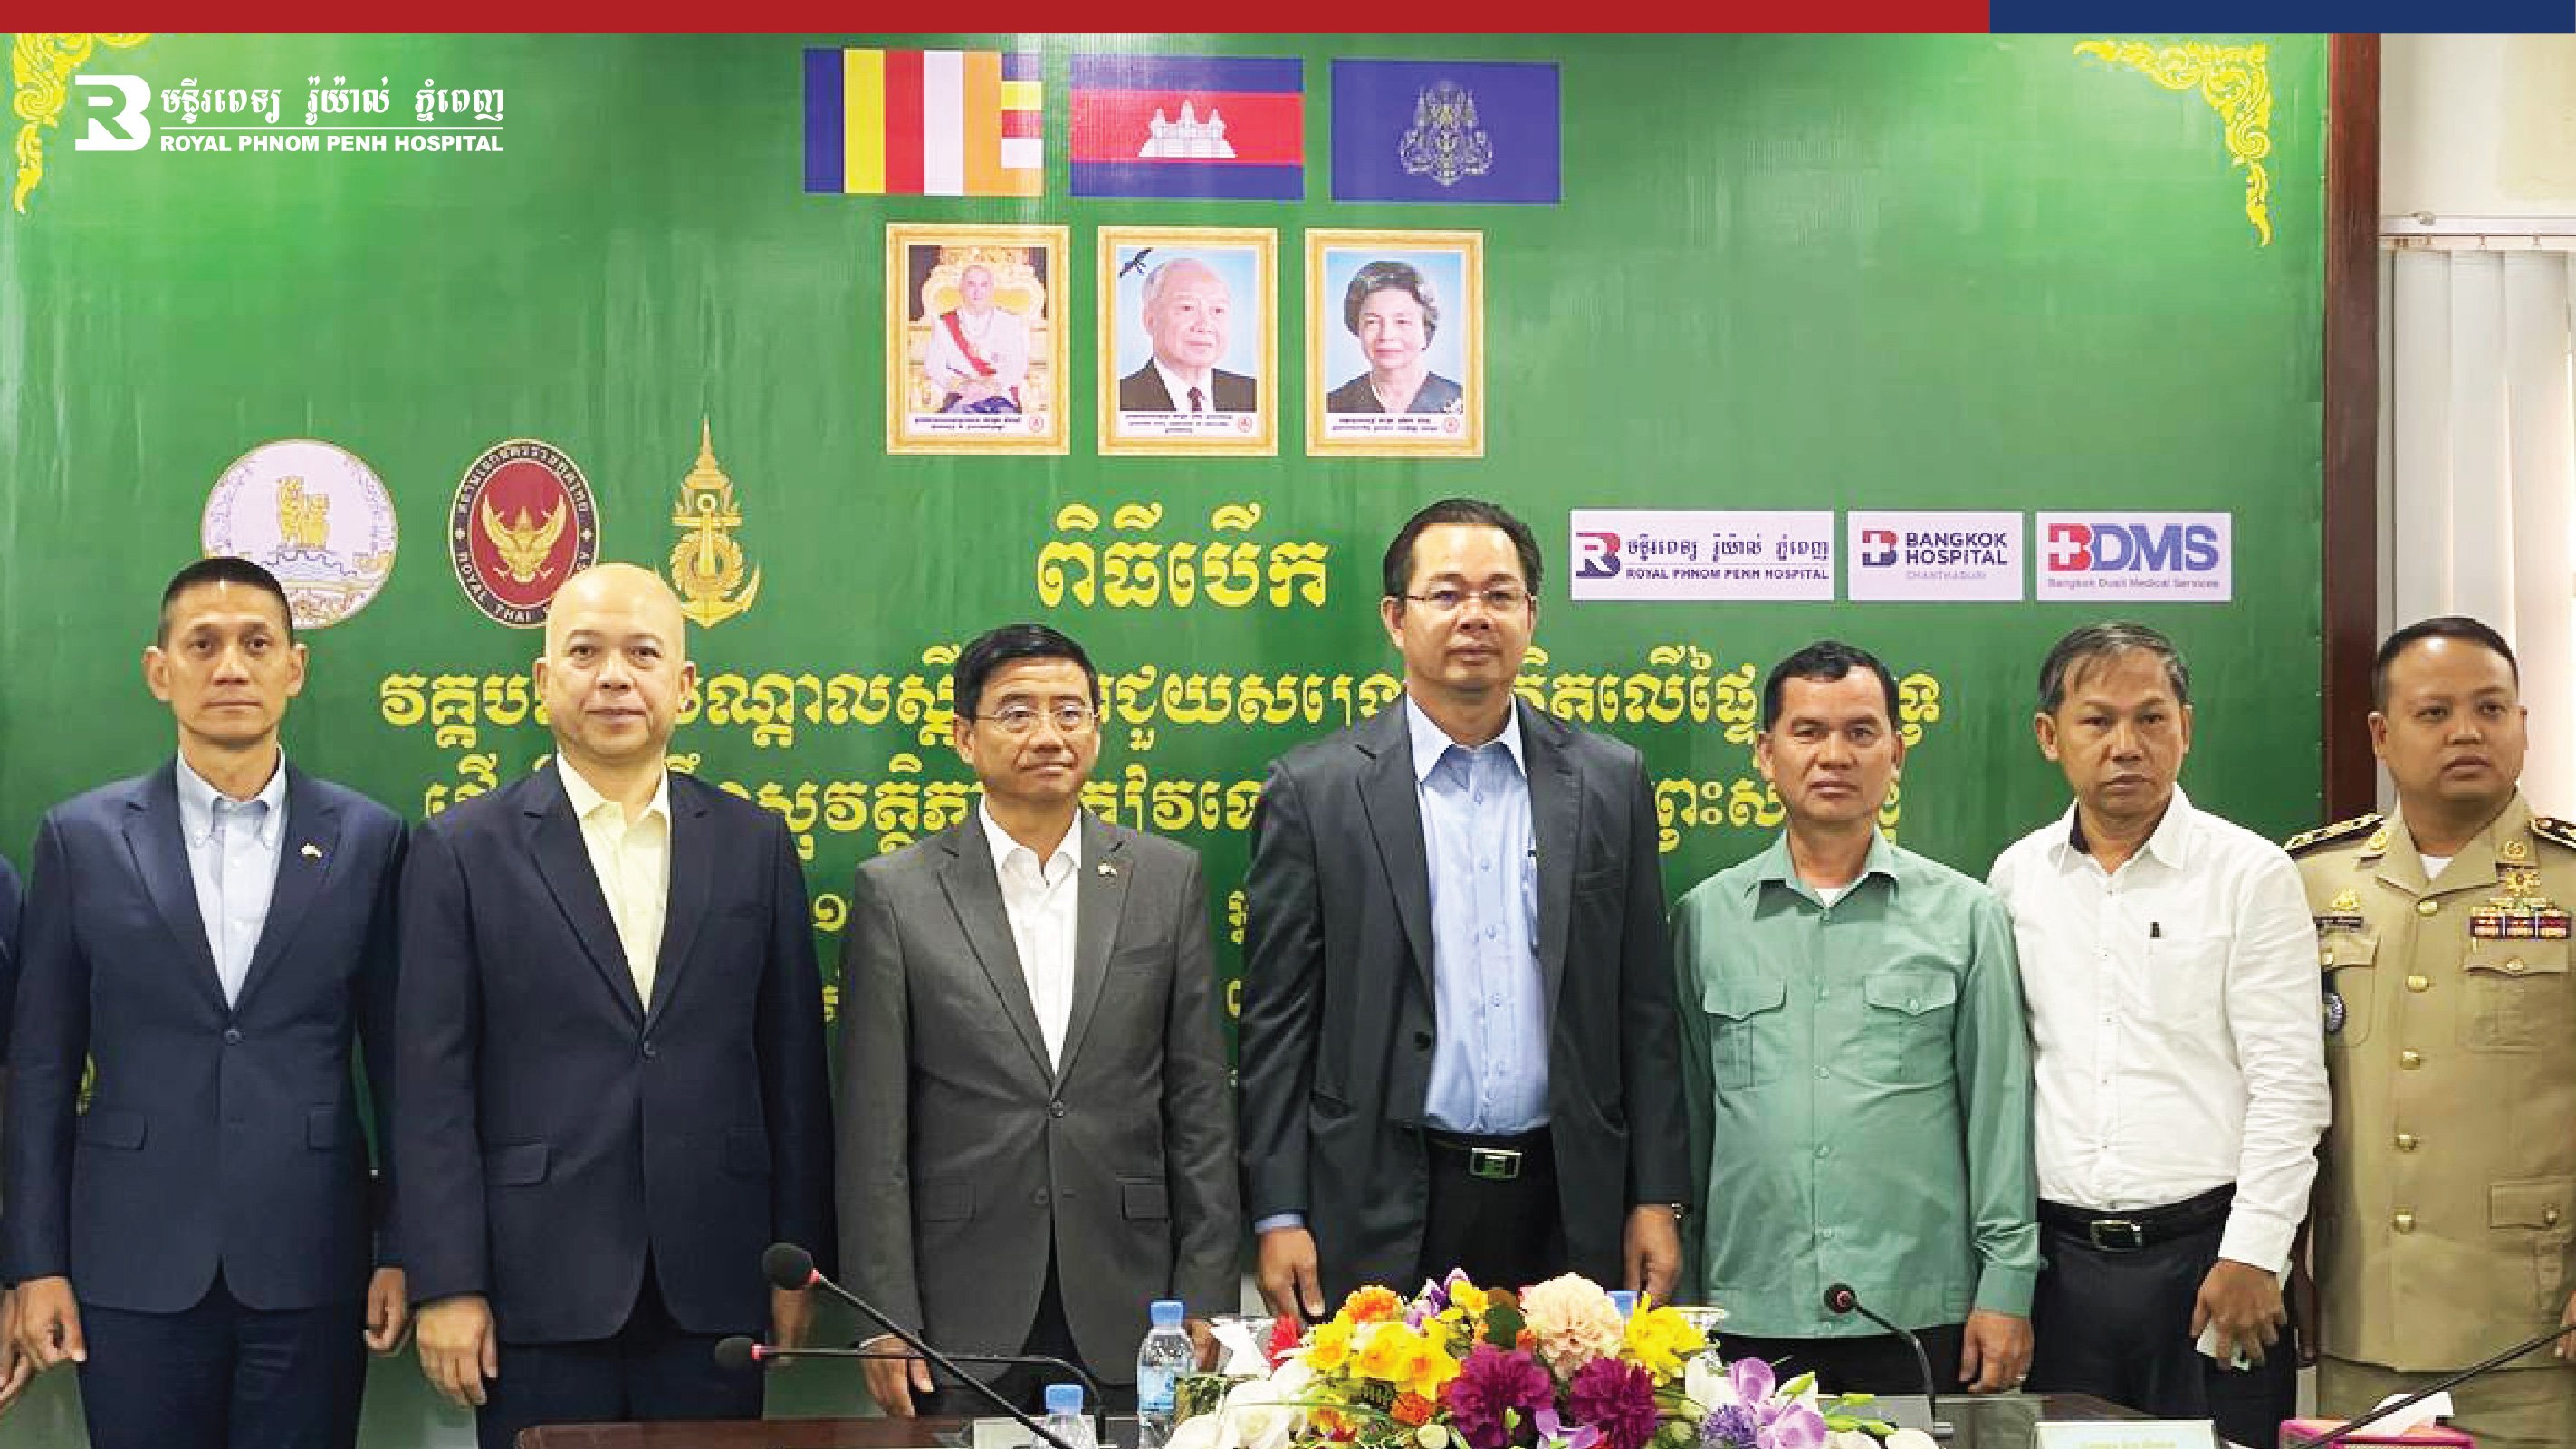 Thailand and Cambodia to build capacity on water rescue  for personnel of Preah Sihanouk Province 13-17 March 2023, Preah Sihanouk Province, Cambodia